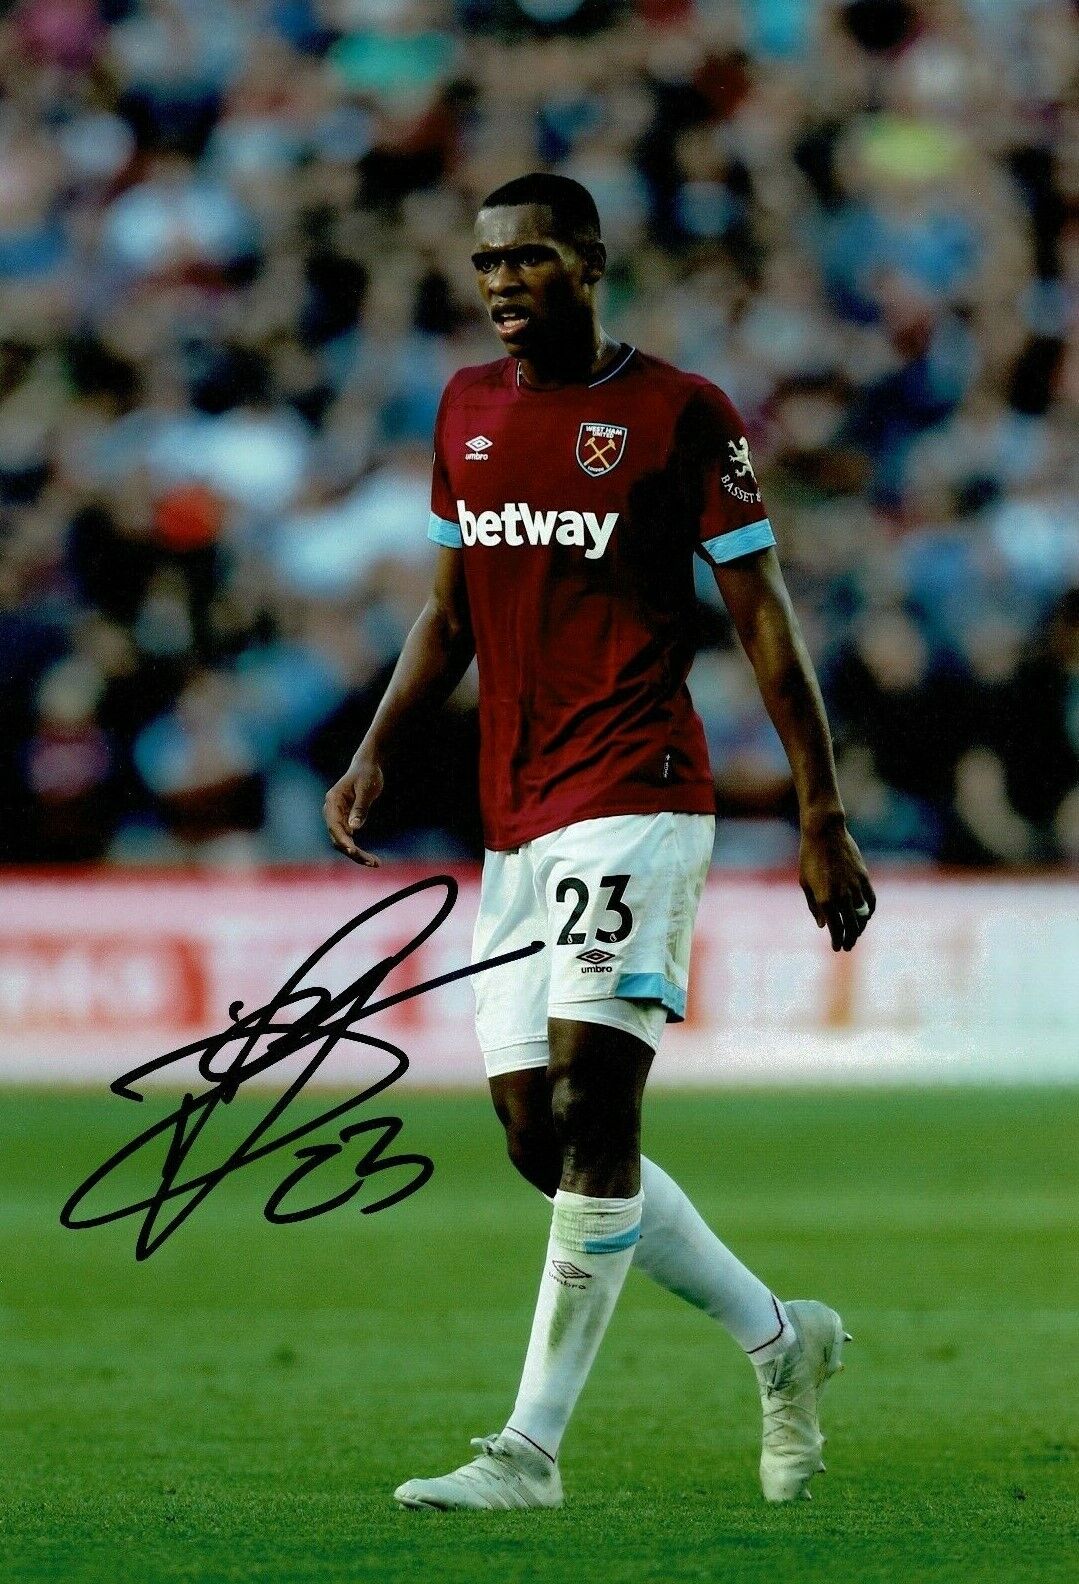 Issa Diop SIGNED 10X8 Photo Poster painting West Ham United F.C. AFTAL COA (1910)